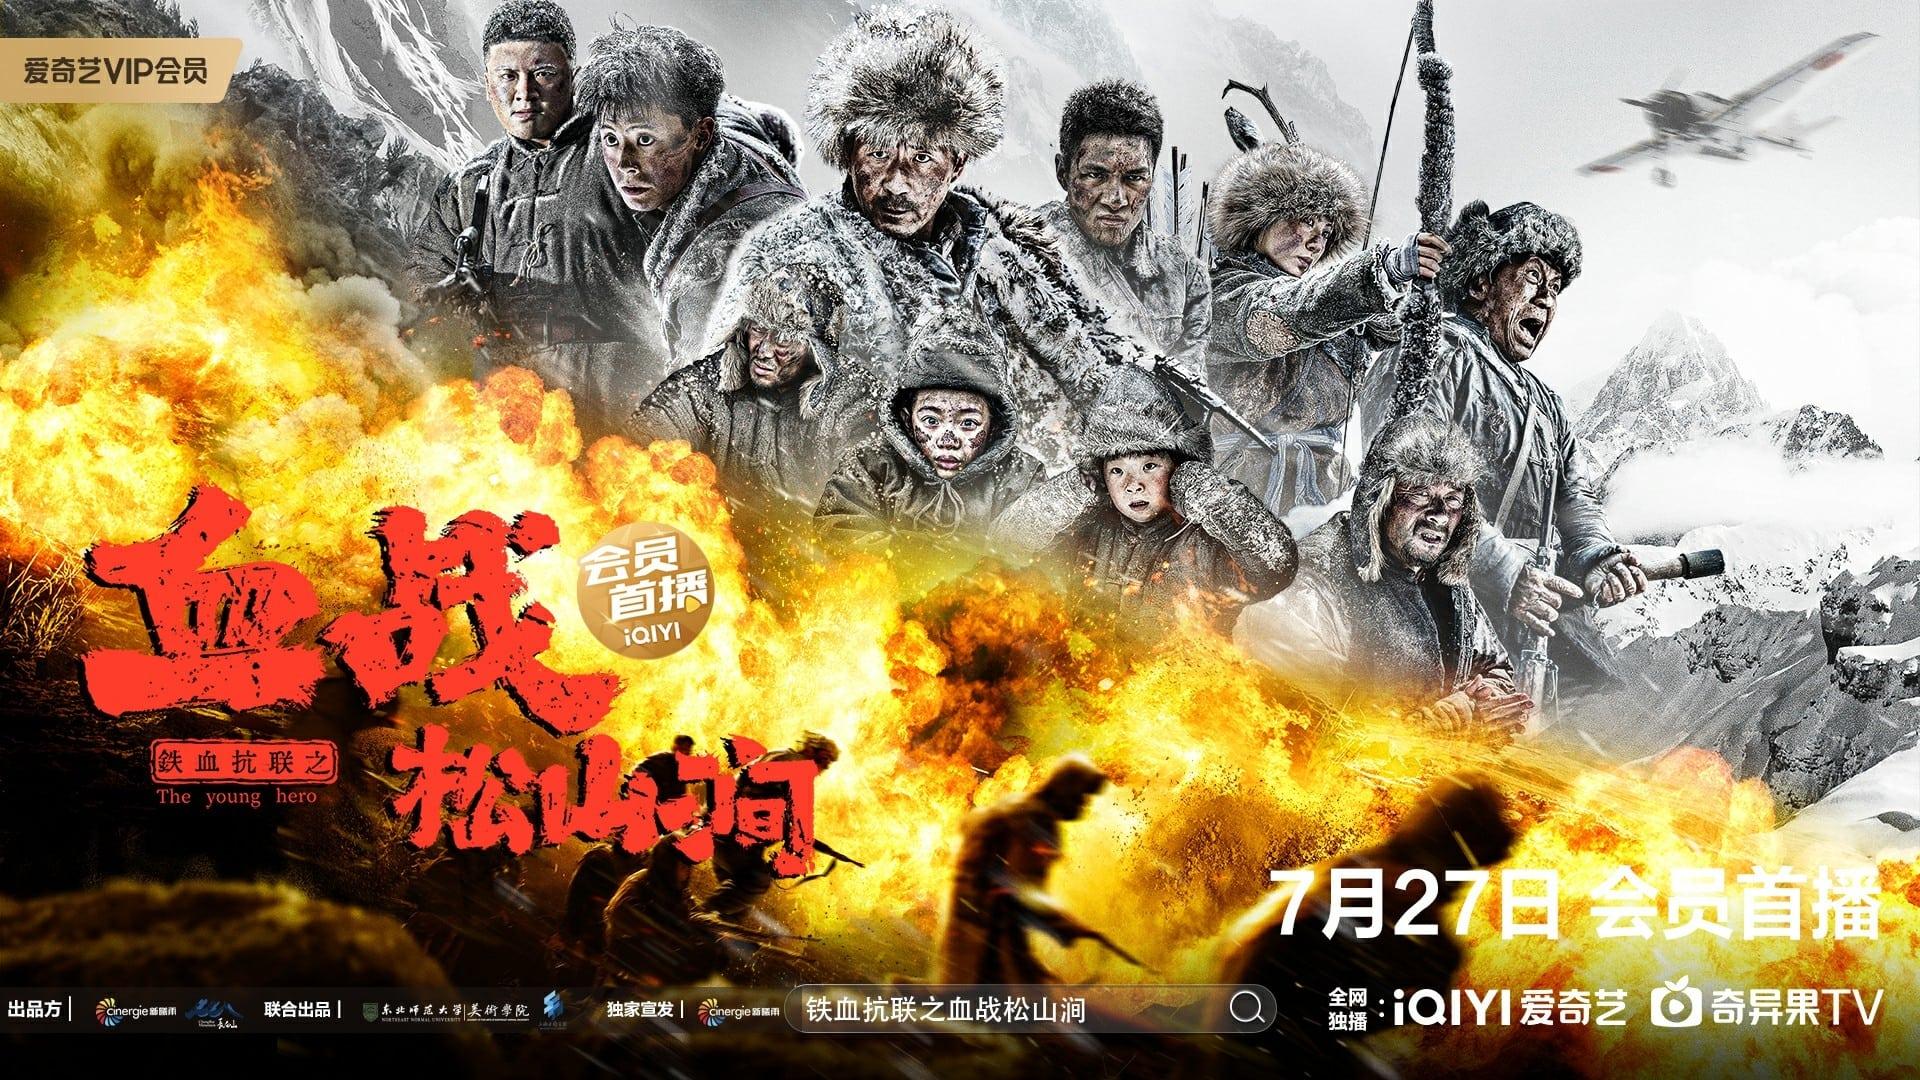 Iron Blood Resistance: The Battle of Songshan Stream backdrop